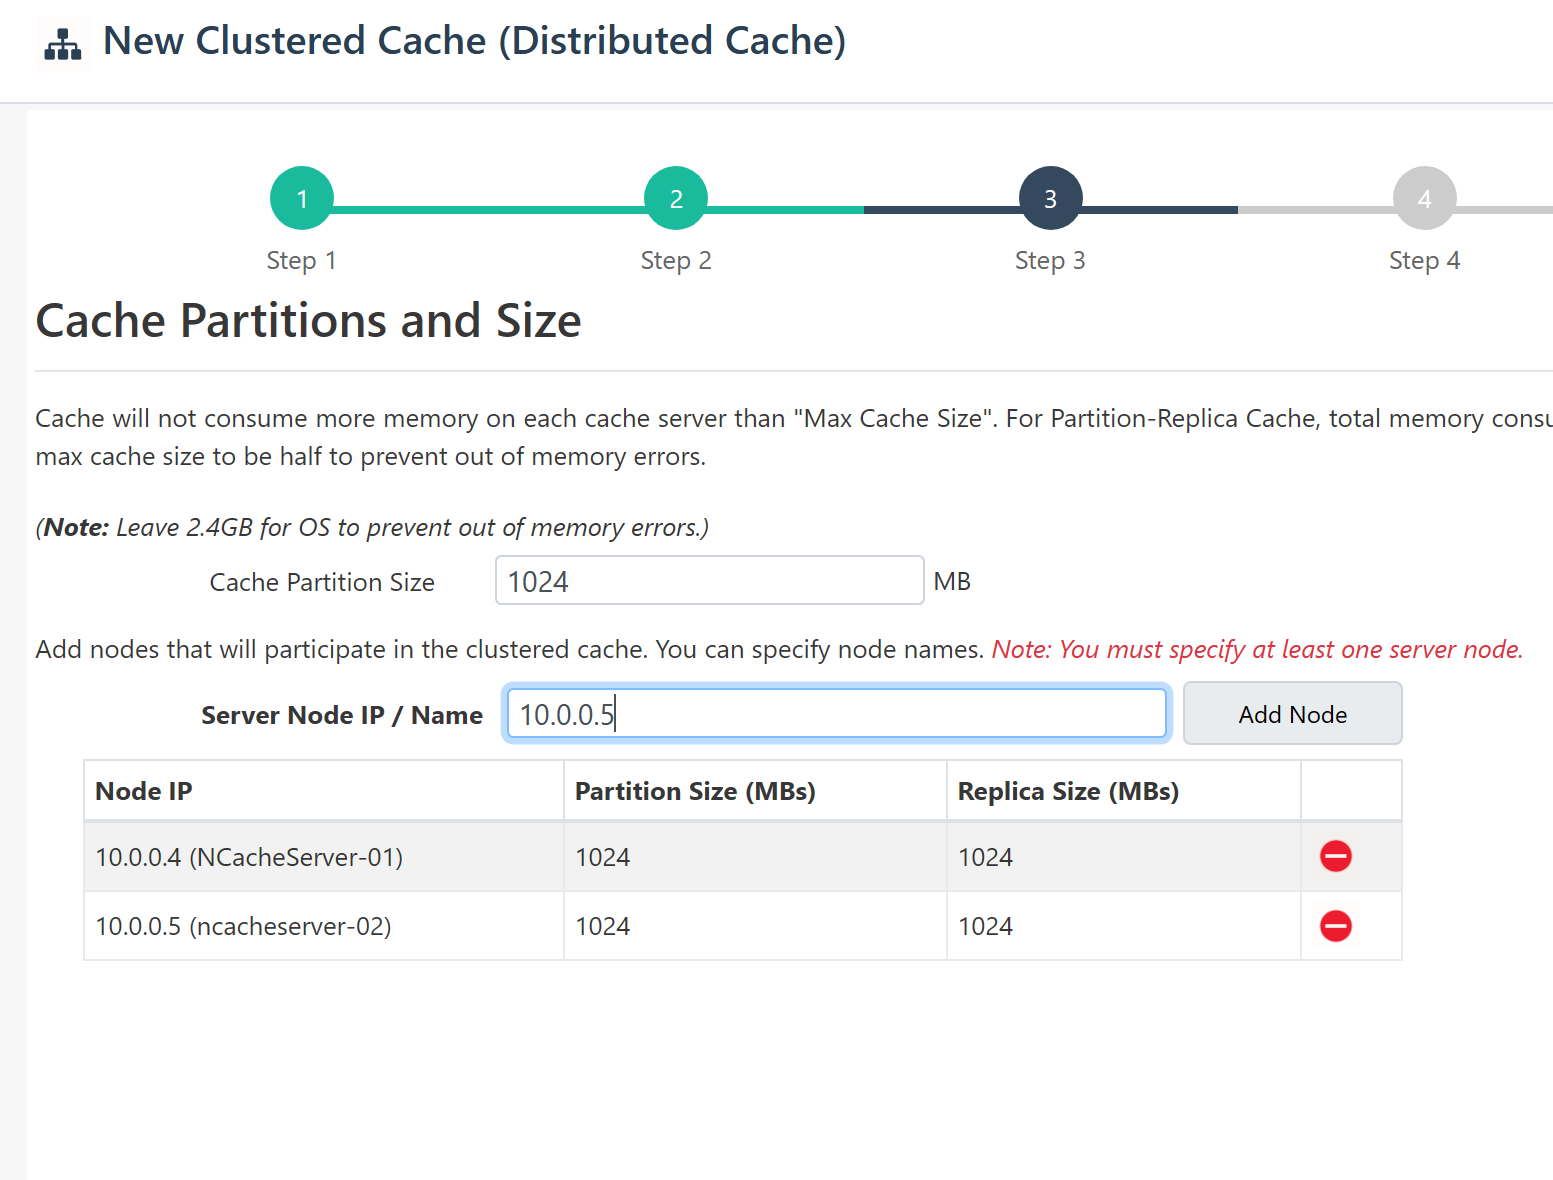 Cache partitions and size